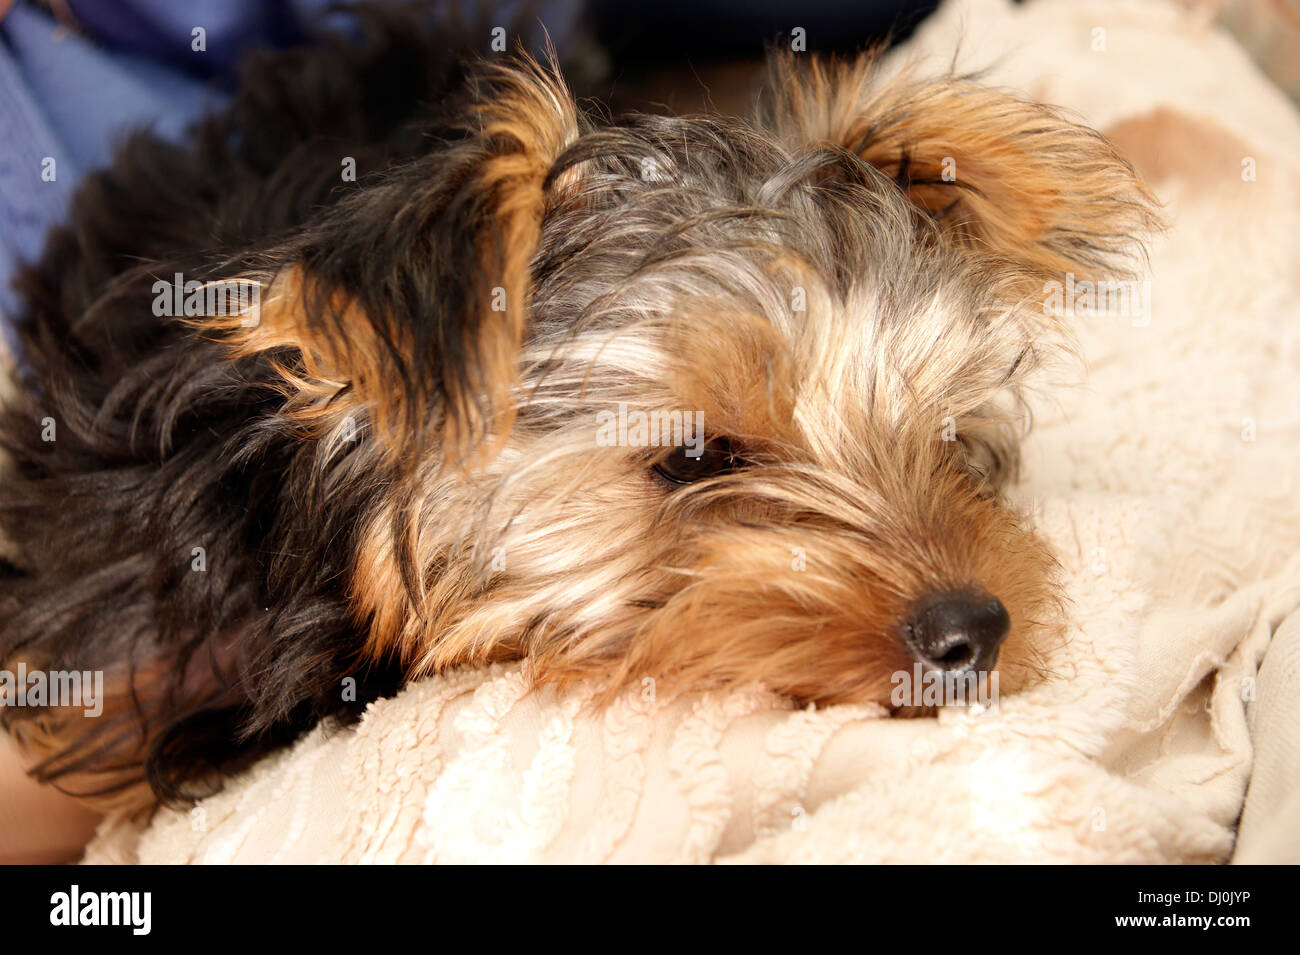 cute yorkshire terrier puppy dog Stock Photo